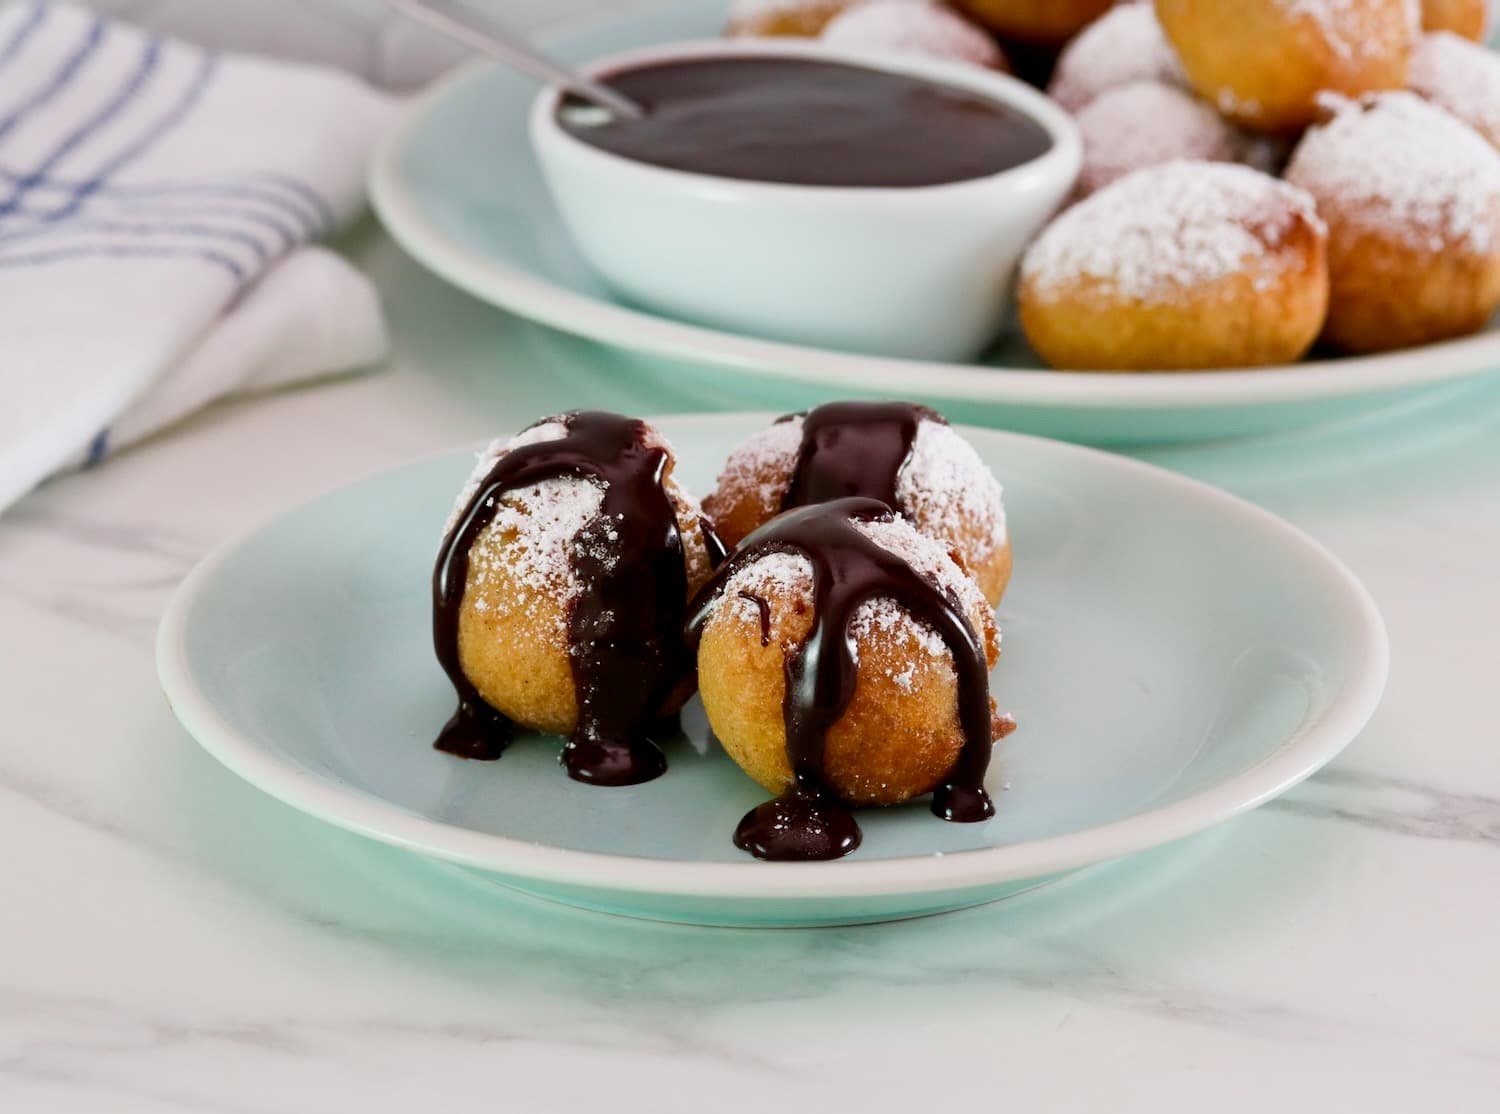 Small dessert plate of three fried buñuelos or bimuelos, topped with powdered sugar and drizzled with chocolate sauce. Platter of powdered sugar buñuelos and a dish of chocolate sauce, cloth napkin in background.